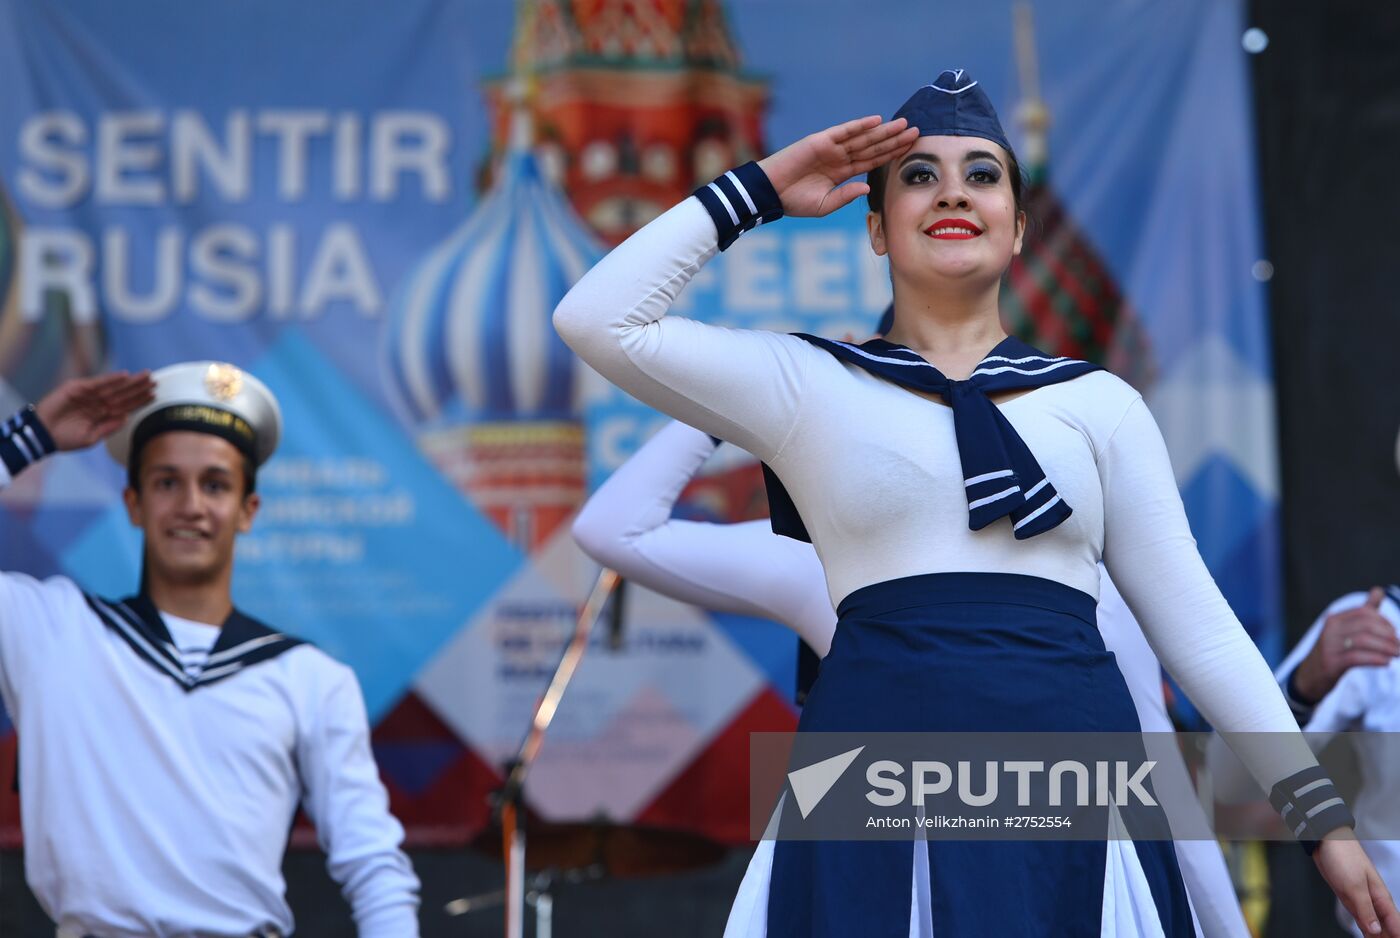 FeelRussia culture festival in Buenos-Aires